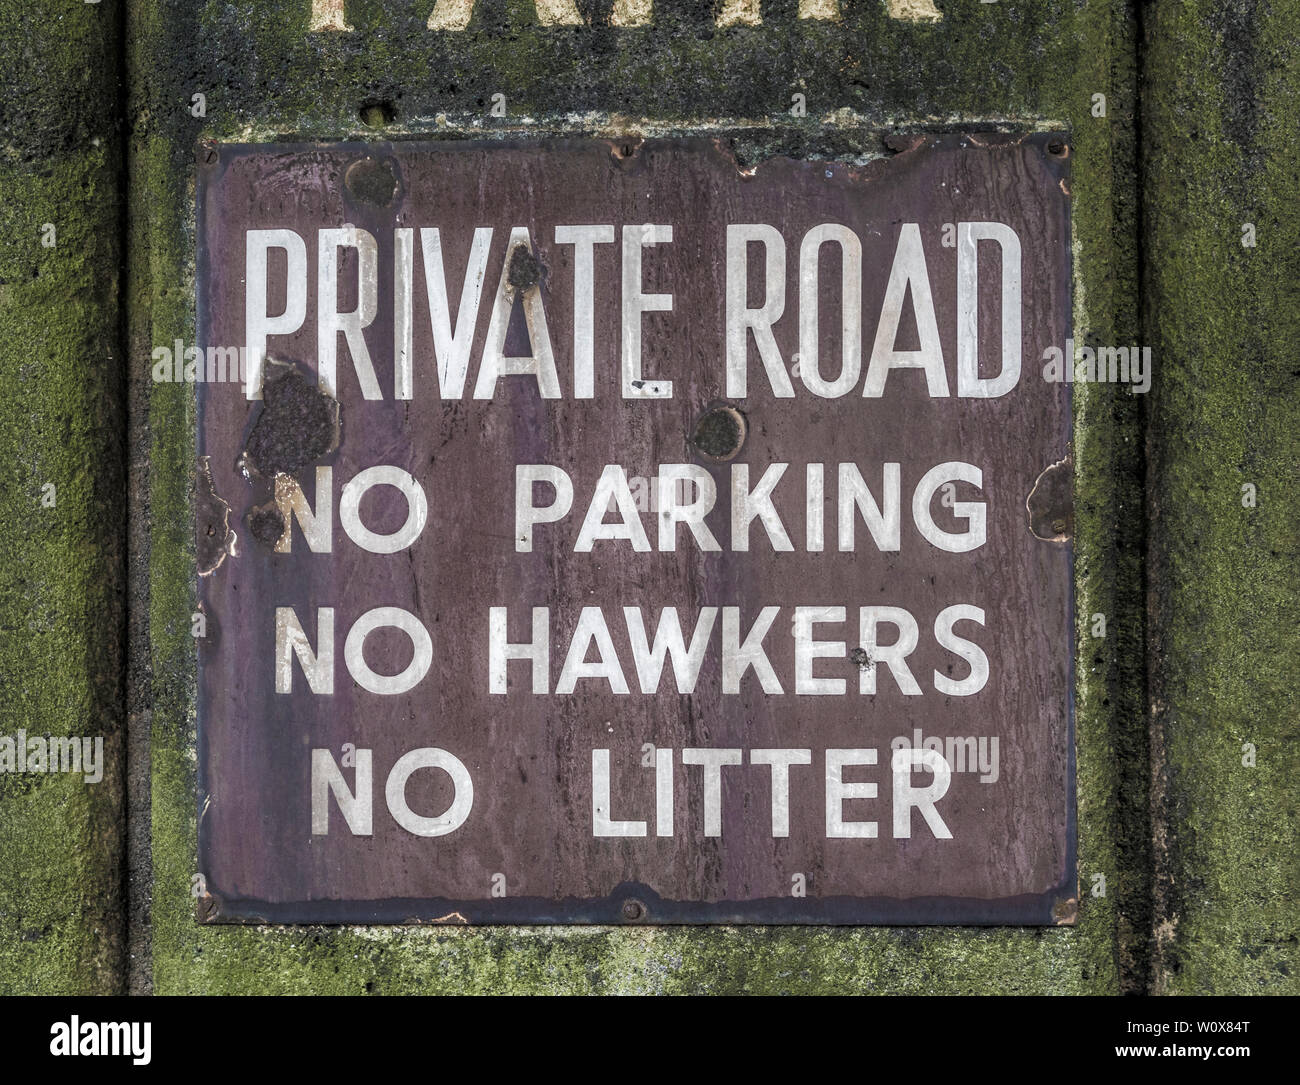 Private road sign. No Parking, No Hawkers, No Litter Stock Photo